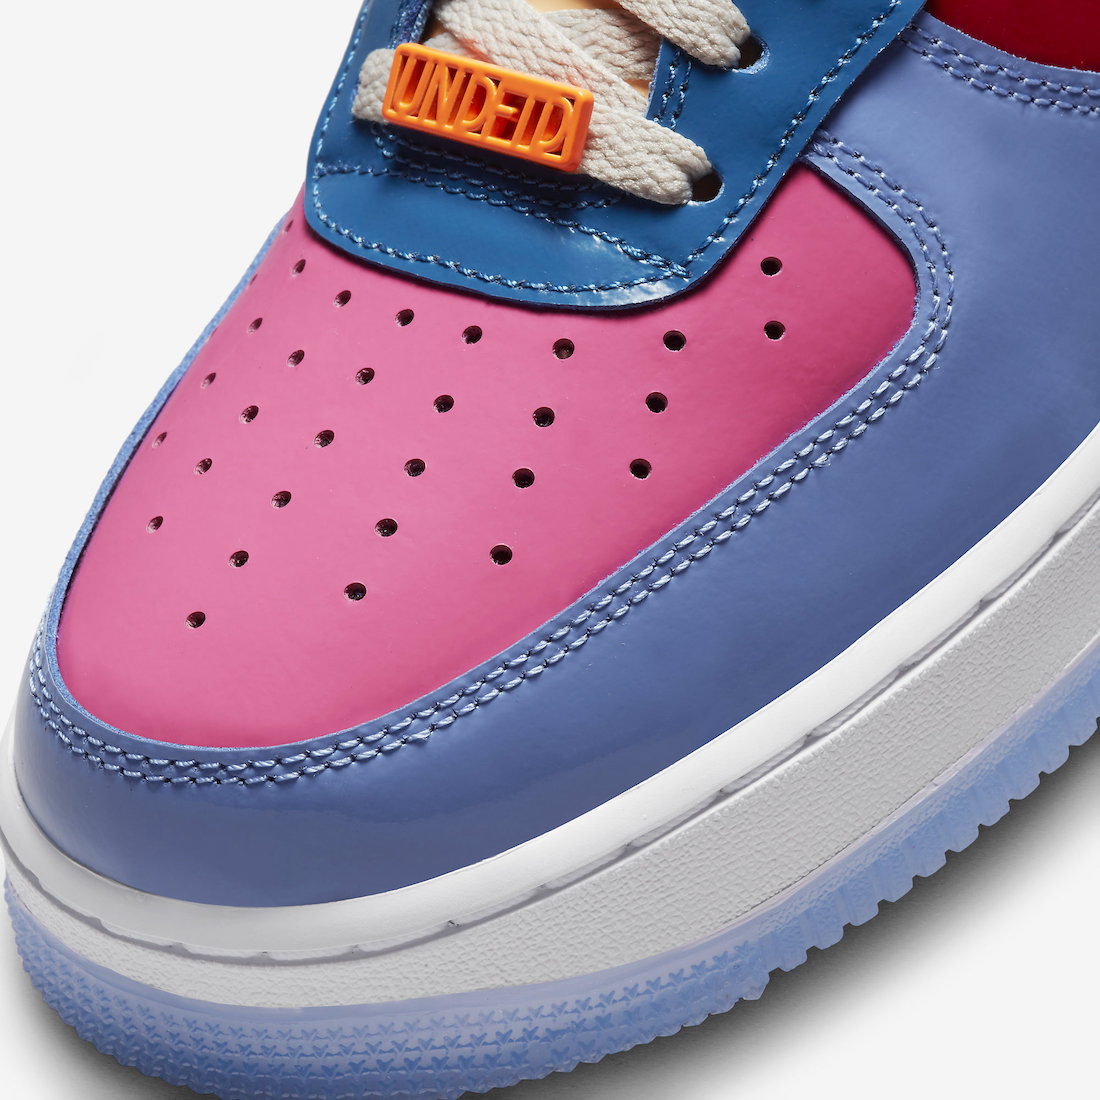 Undefeated Nike Air Force 1 Low Patent DV5255 400 Release Date 6